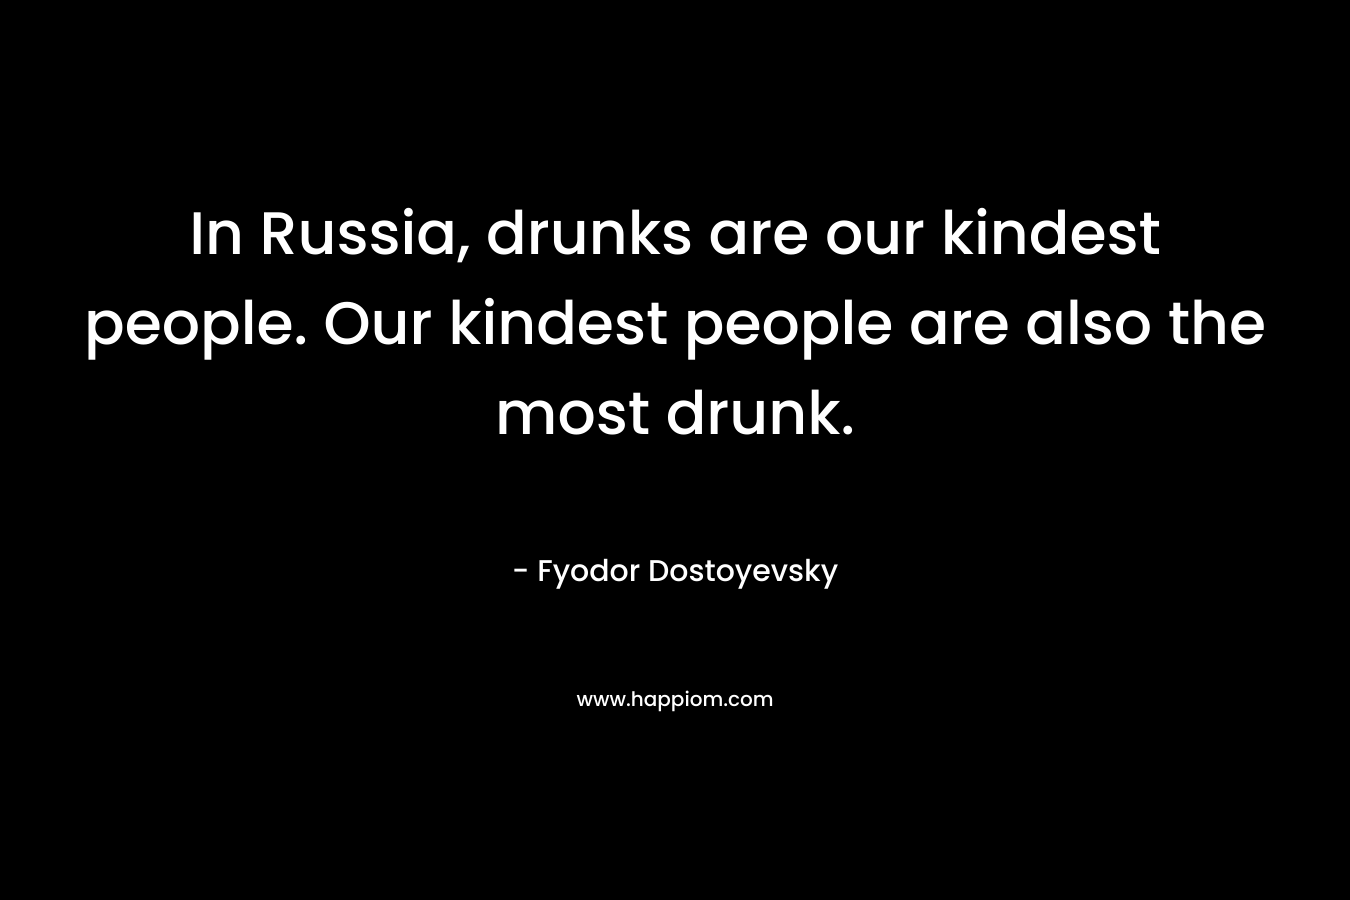 In Russia, drunks are our kindest people. Our kindest people are also the most drunk. – Fyodor Dostoyevsky